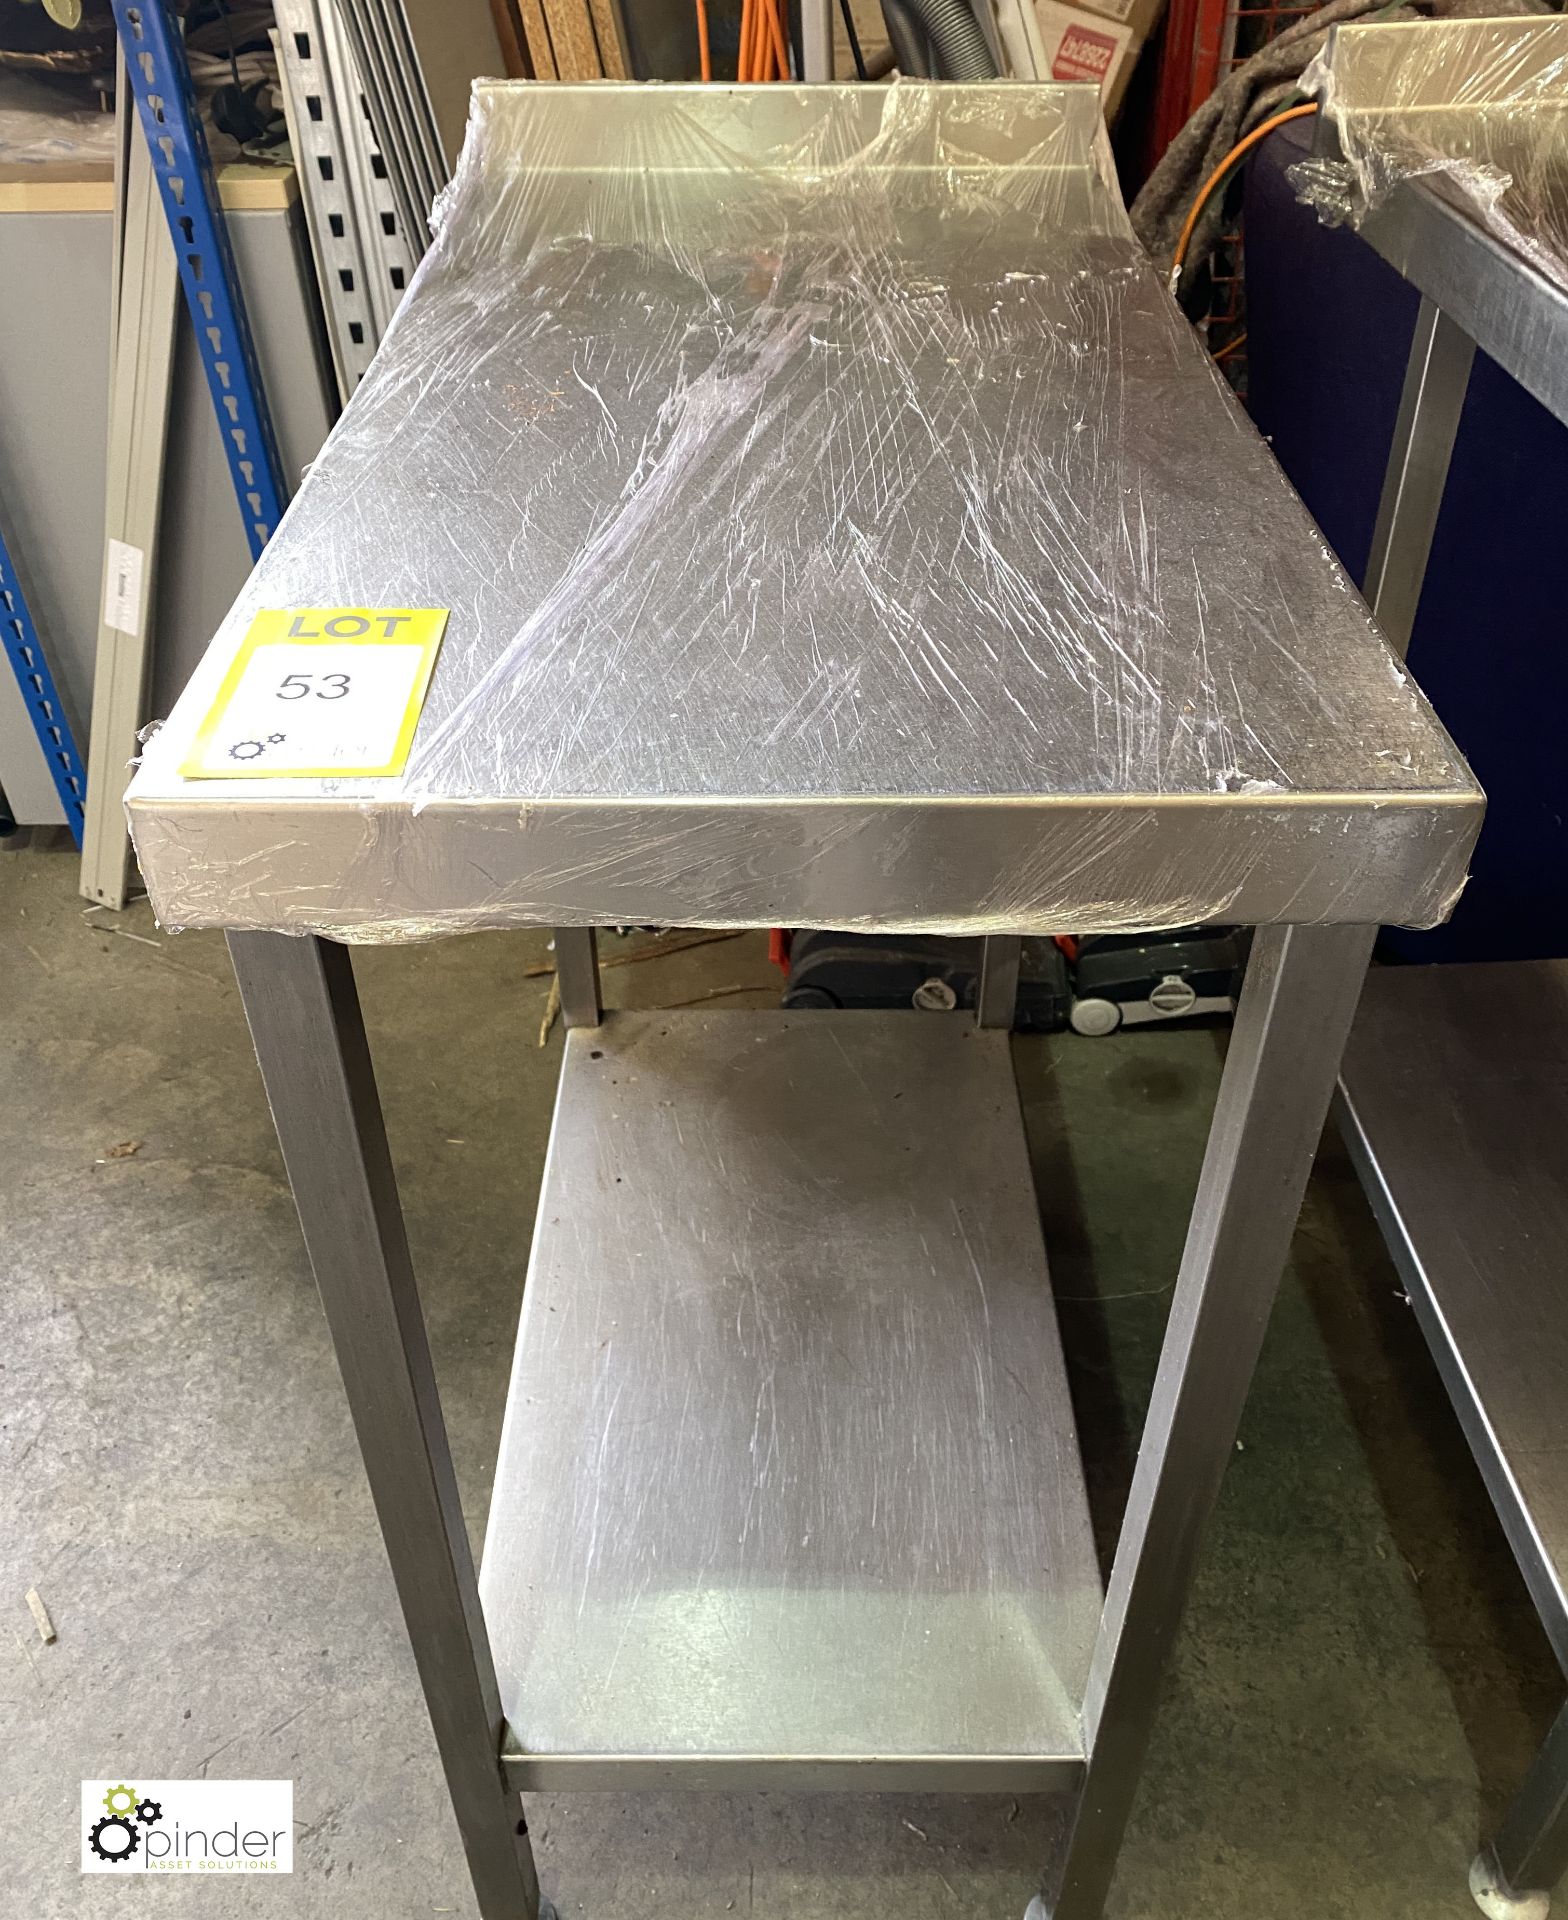 Stainless steel Preparation Side Table, 400mm x 750mm x 910mm, with undershelf and rear lip (